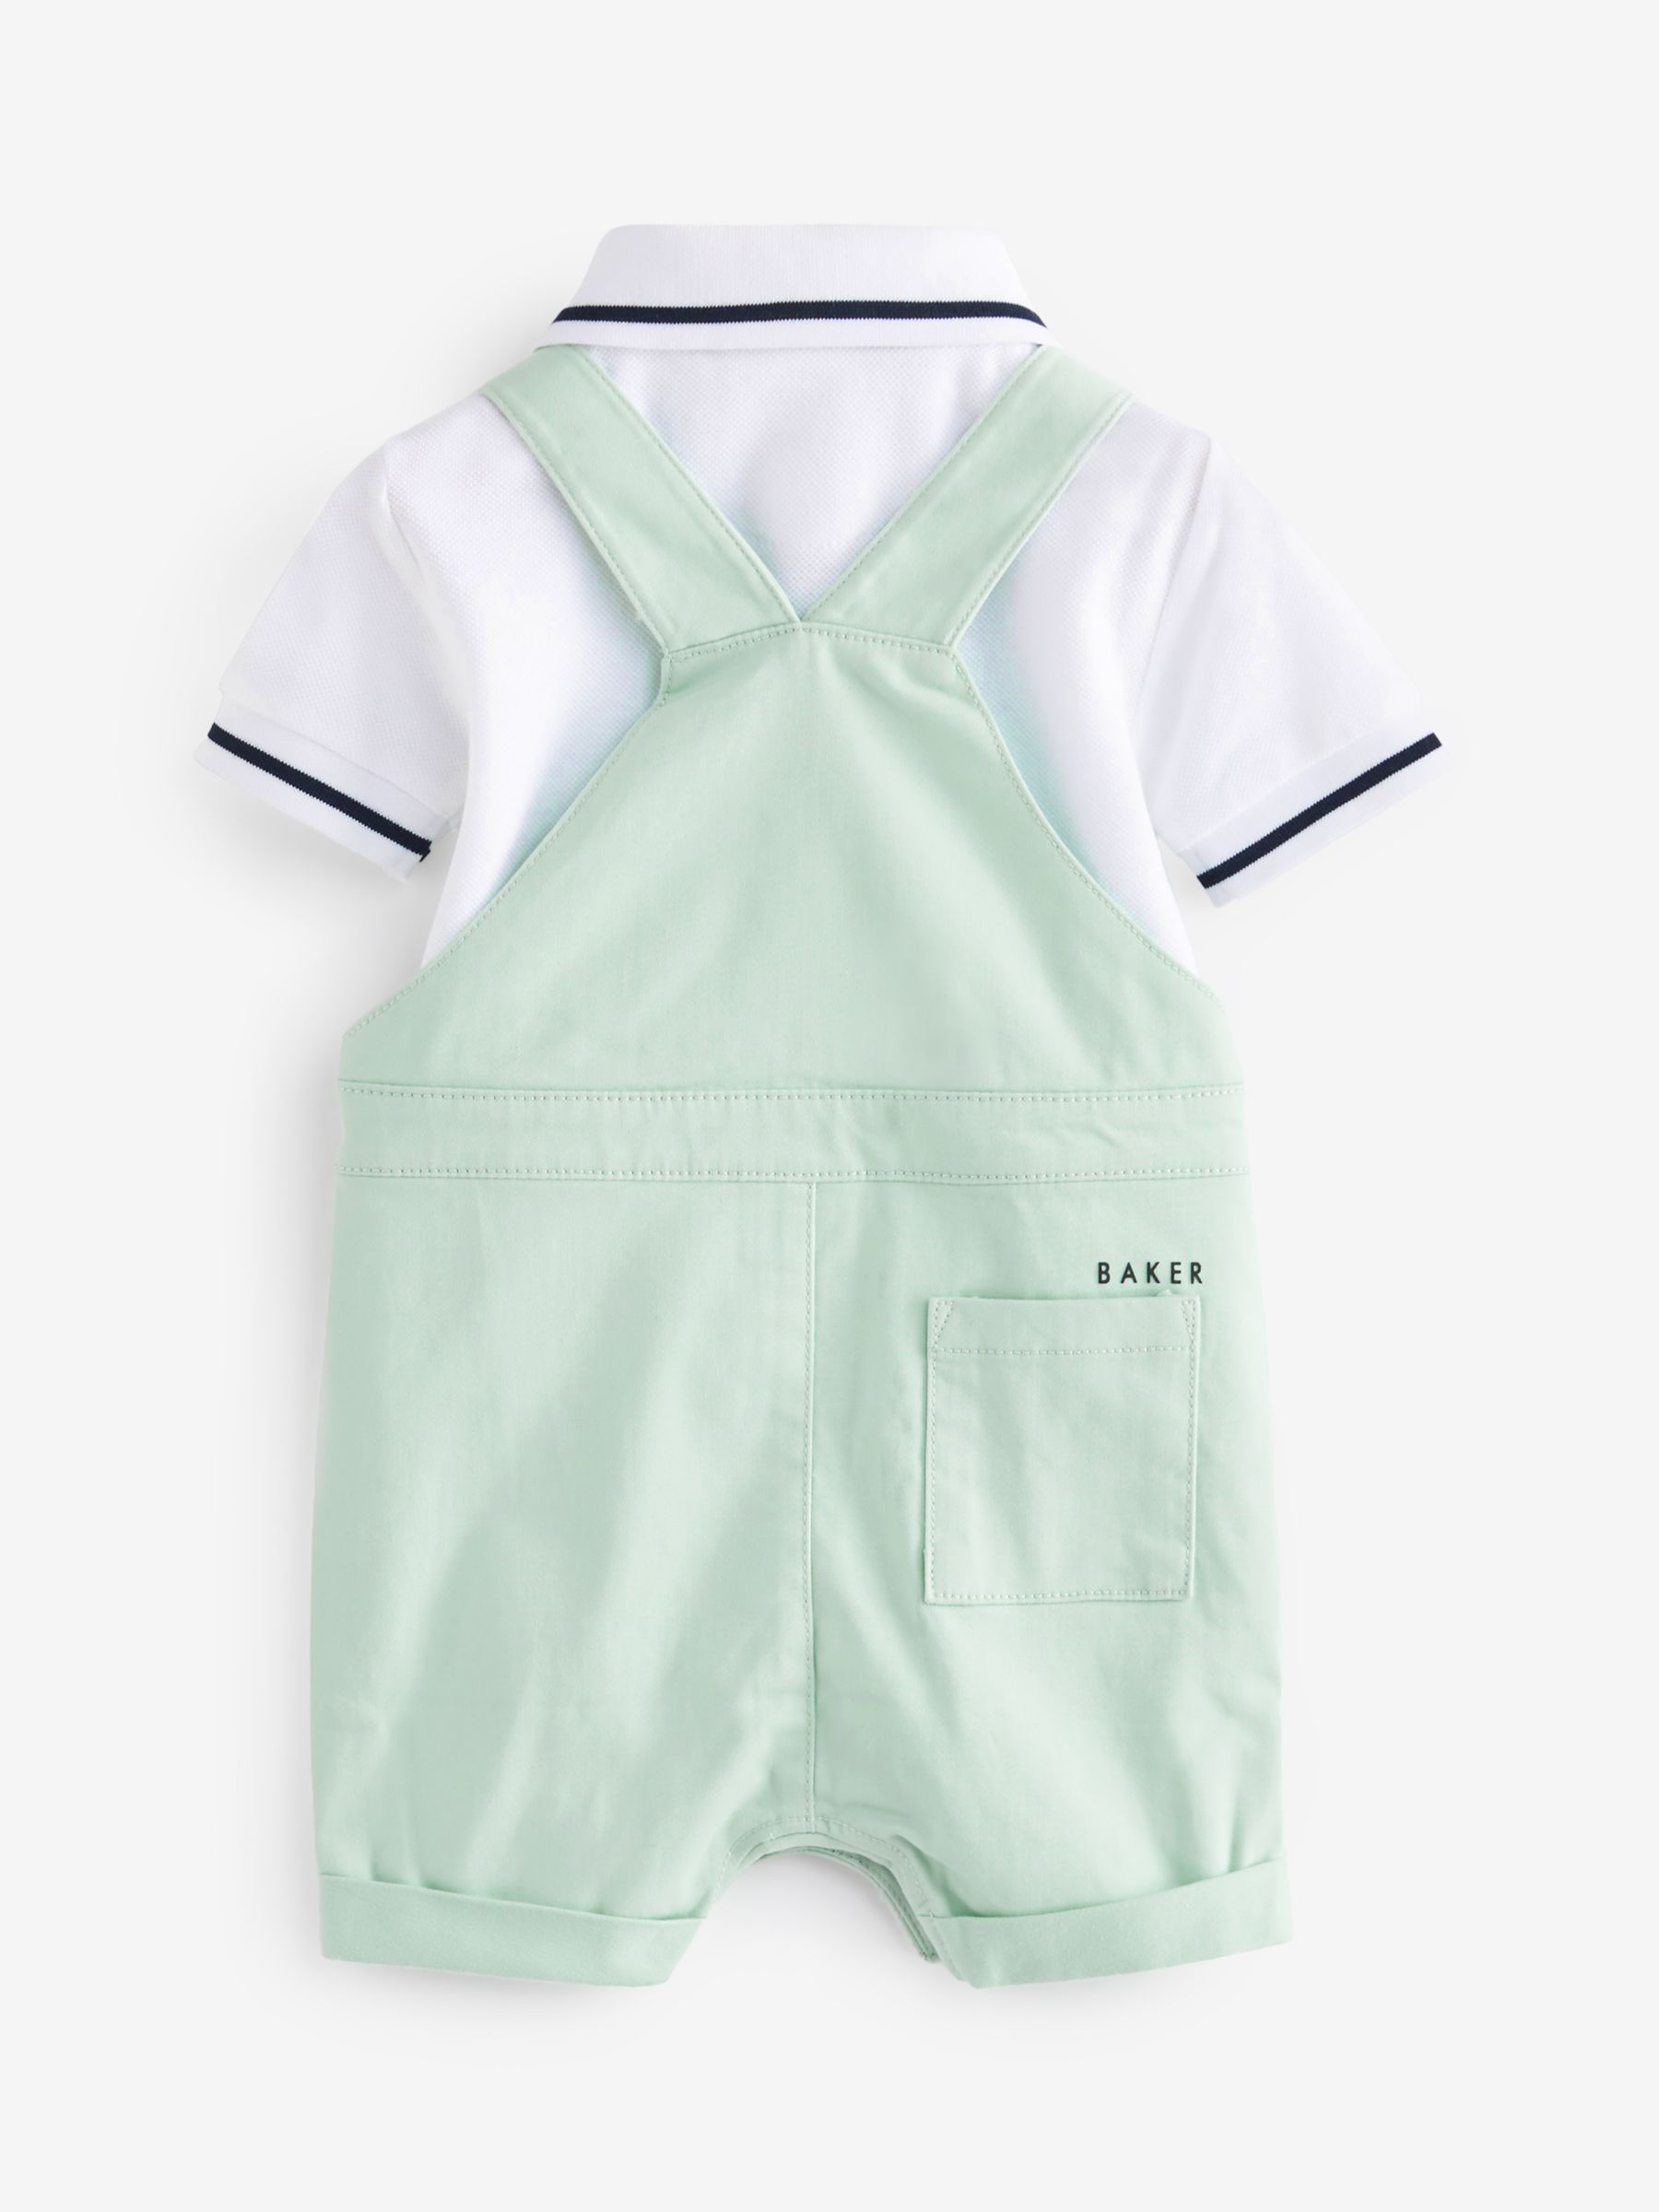 Ted Baker Baby Dungarees & Polo Shirt Set, Green, 0-3 months